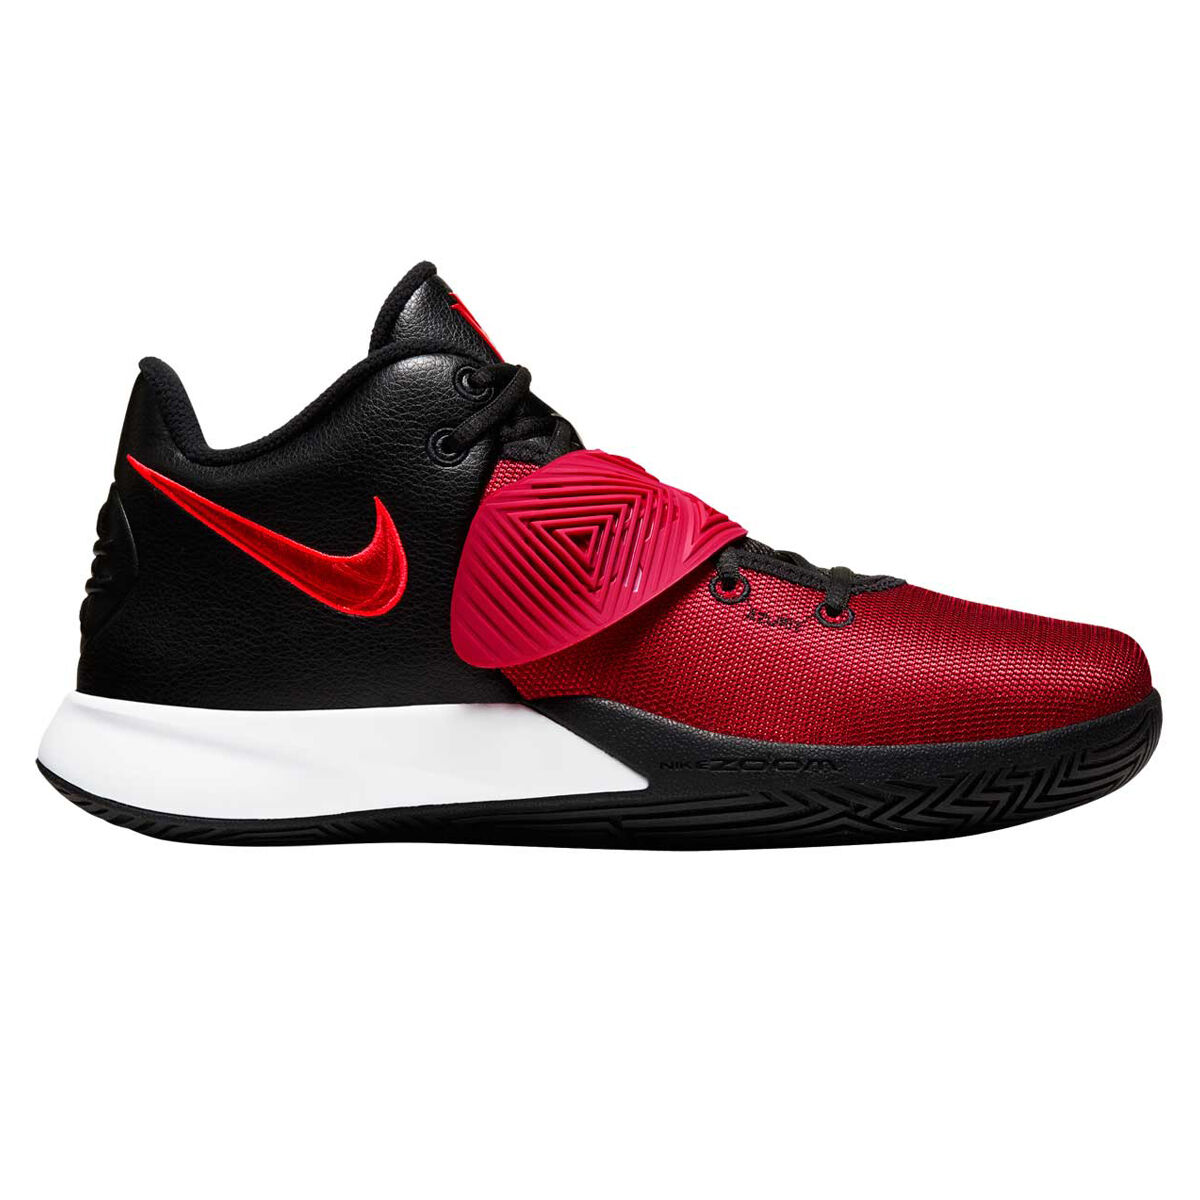 kyrie basketball shoes red